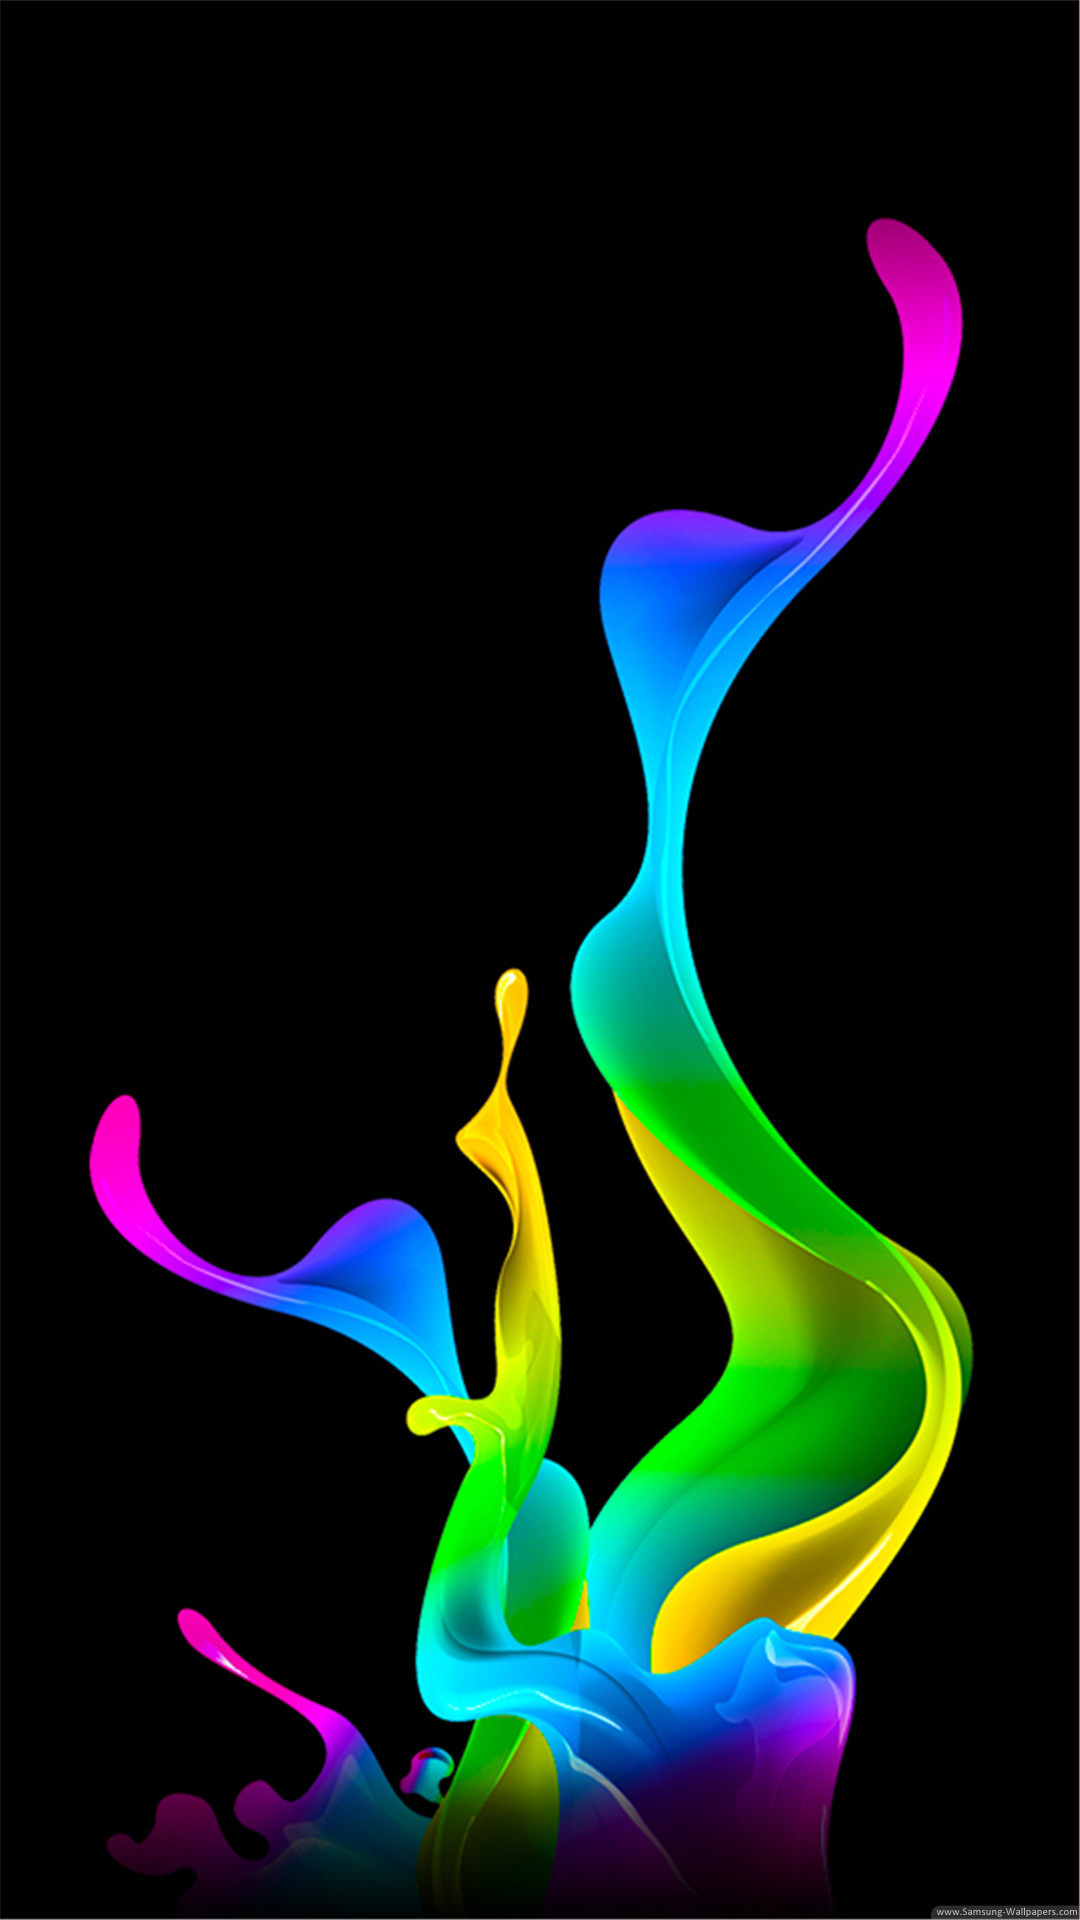 Colourful Amoled Wallpaper 4K - Enjoy and share your favorite beautiful ...